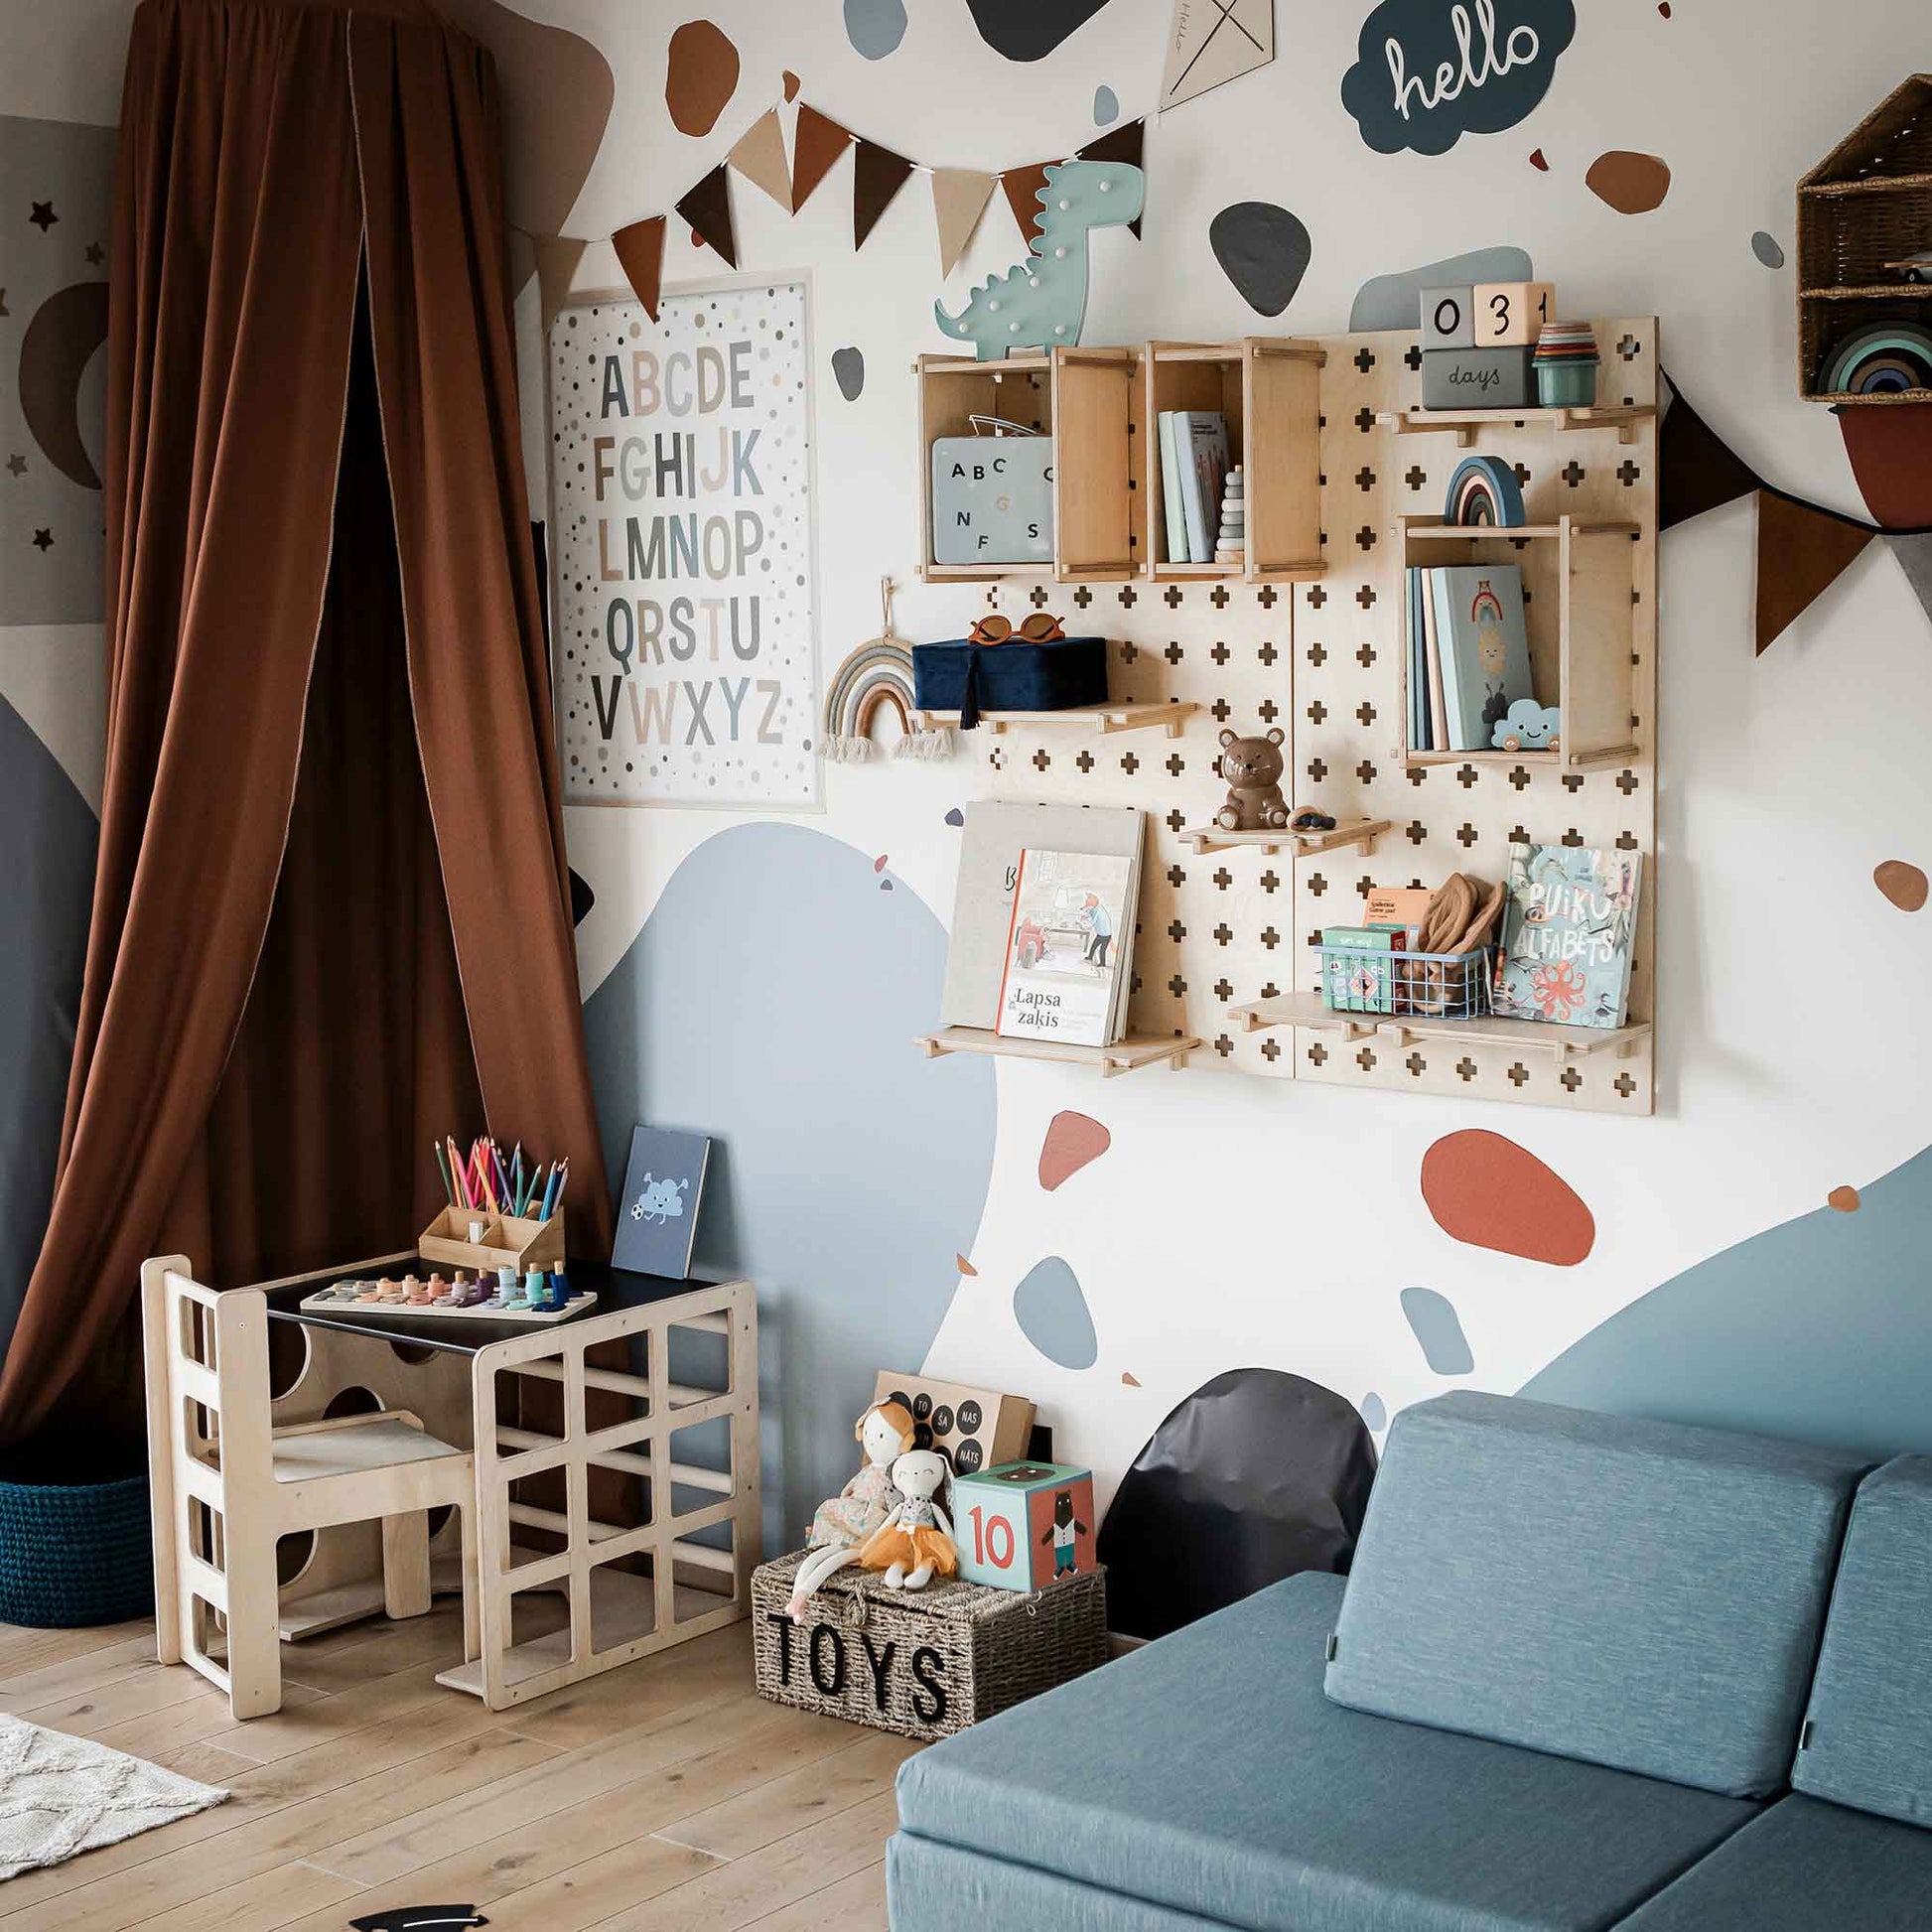 Child's room with educational and playful decor, including an alphabet chart, wooden shelves with toys and books, a small desk with art supplies, a toddler toy basket, and a blue sofa. Walls have abstract patterns. A 2-in-1 table and chair set or activity cube enhances the learning space.